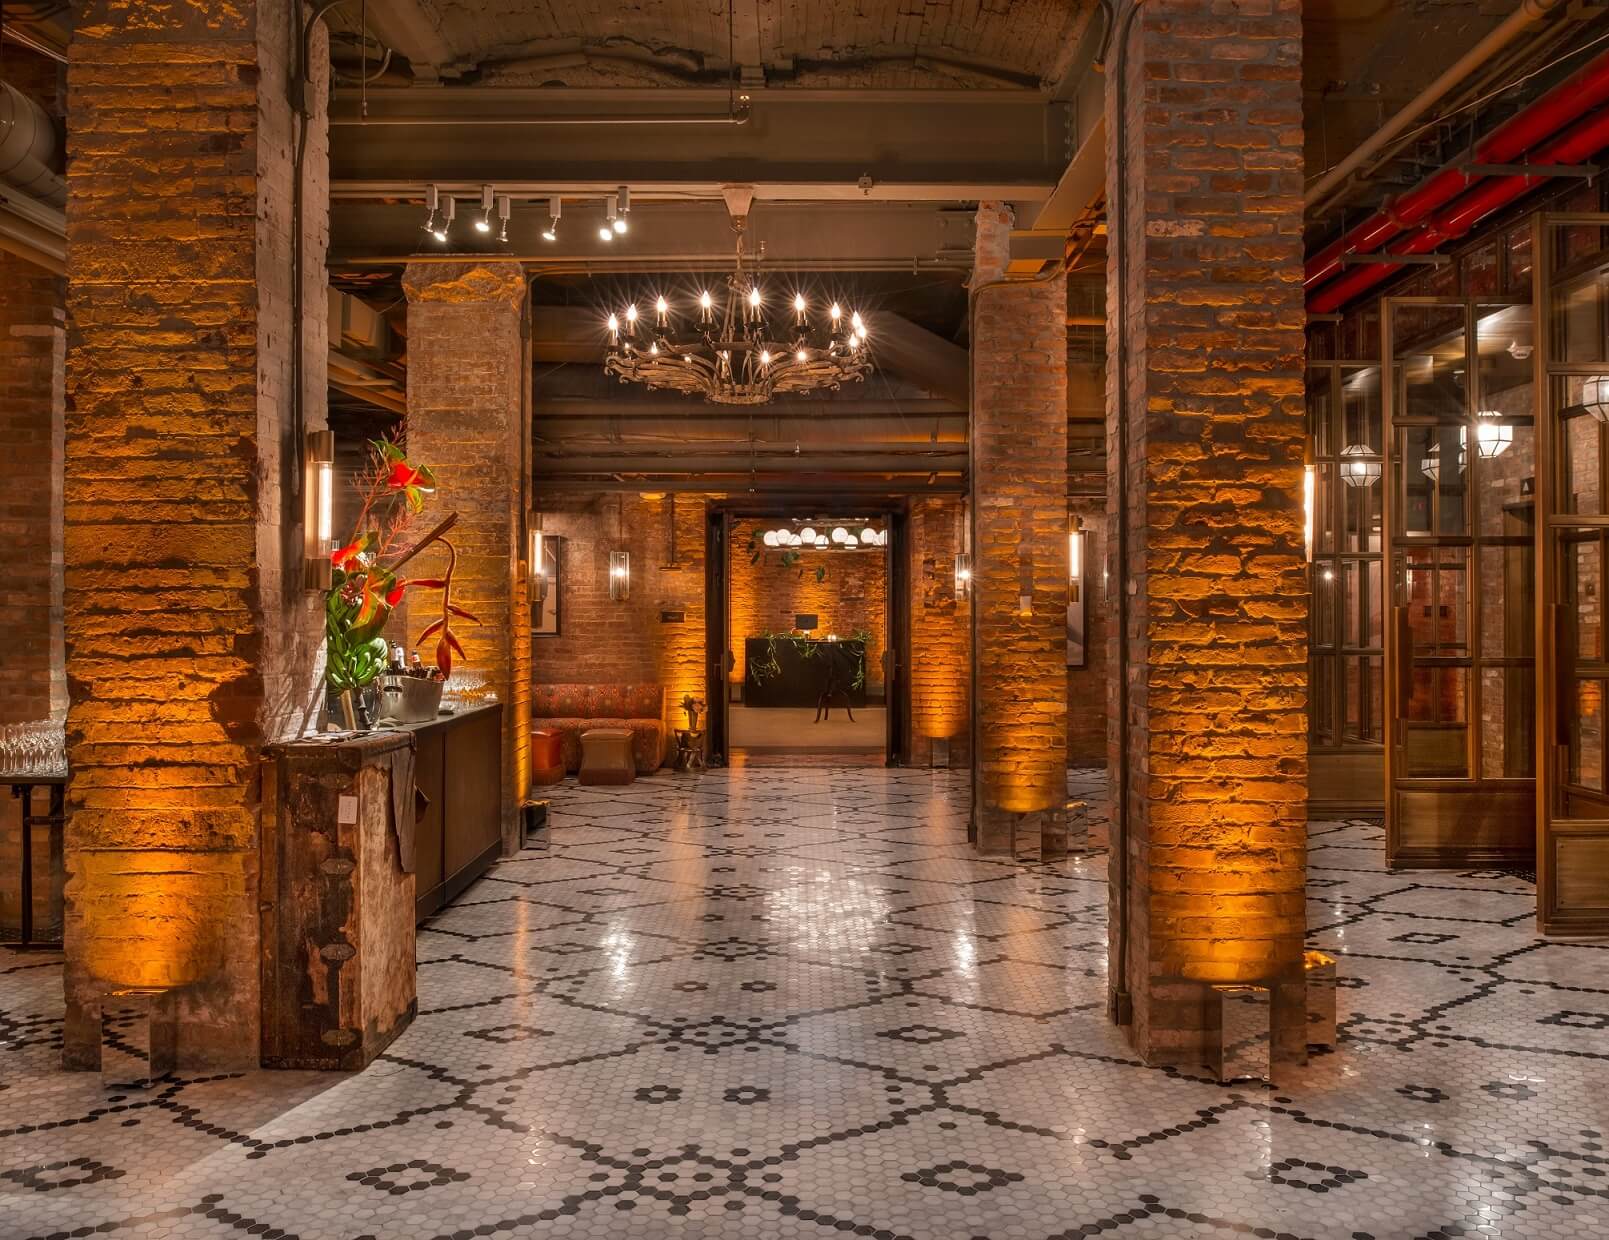 Lobby area at the main entrance of The Beekman Hotel